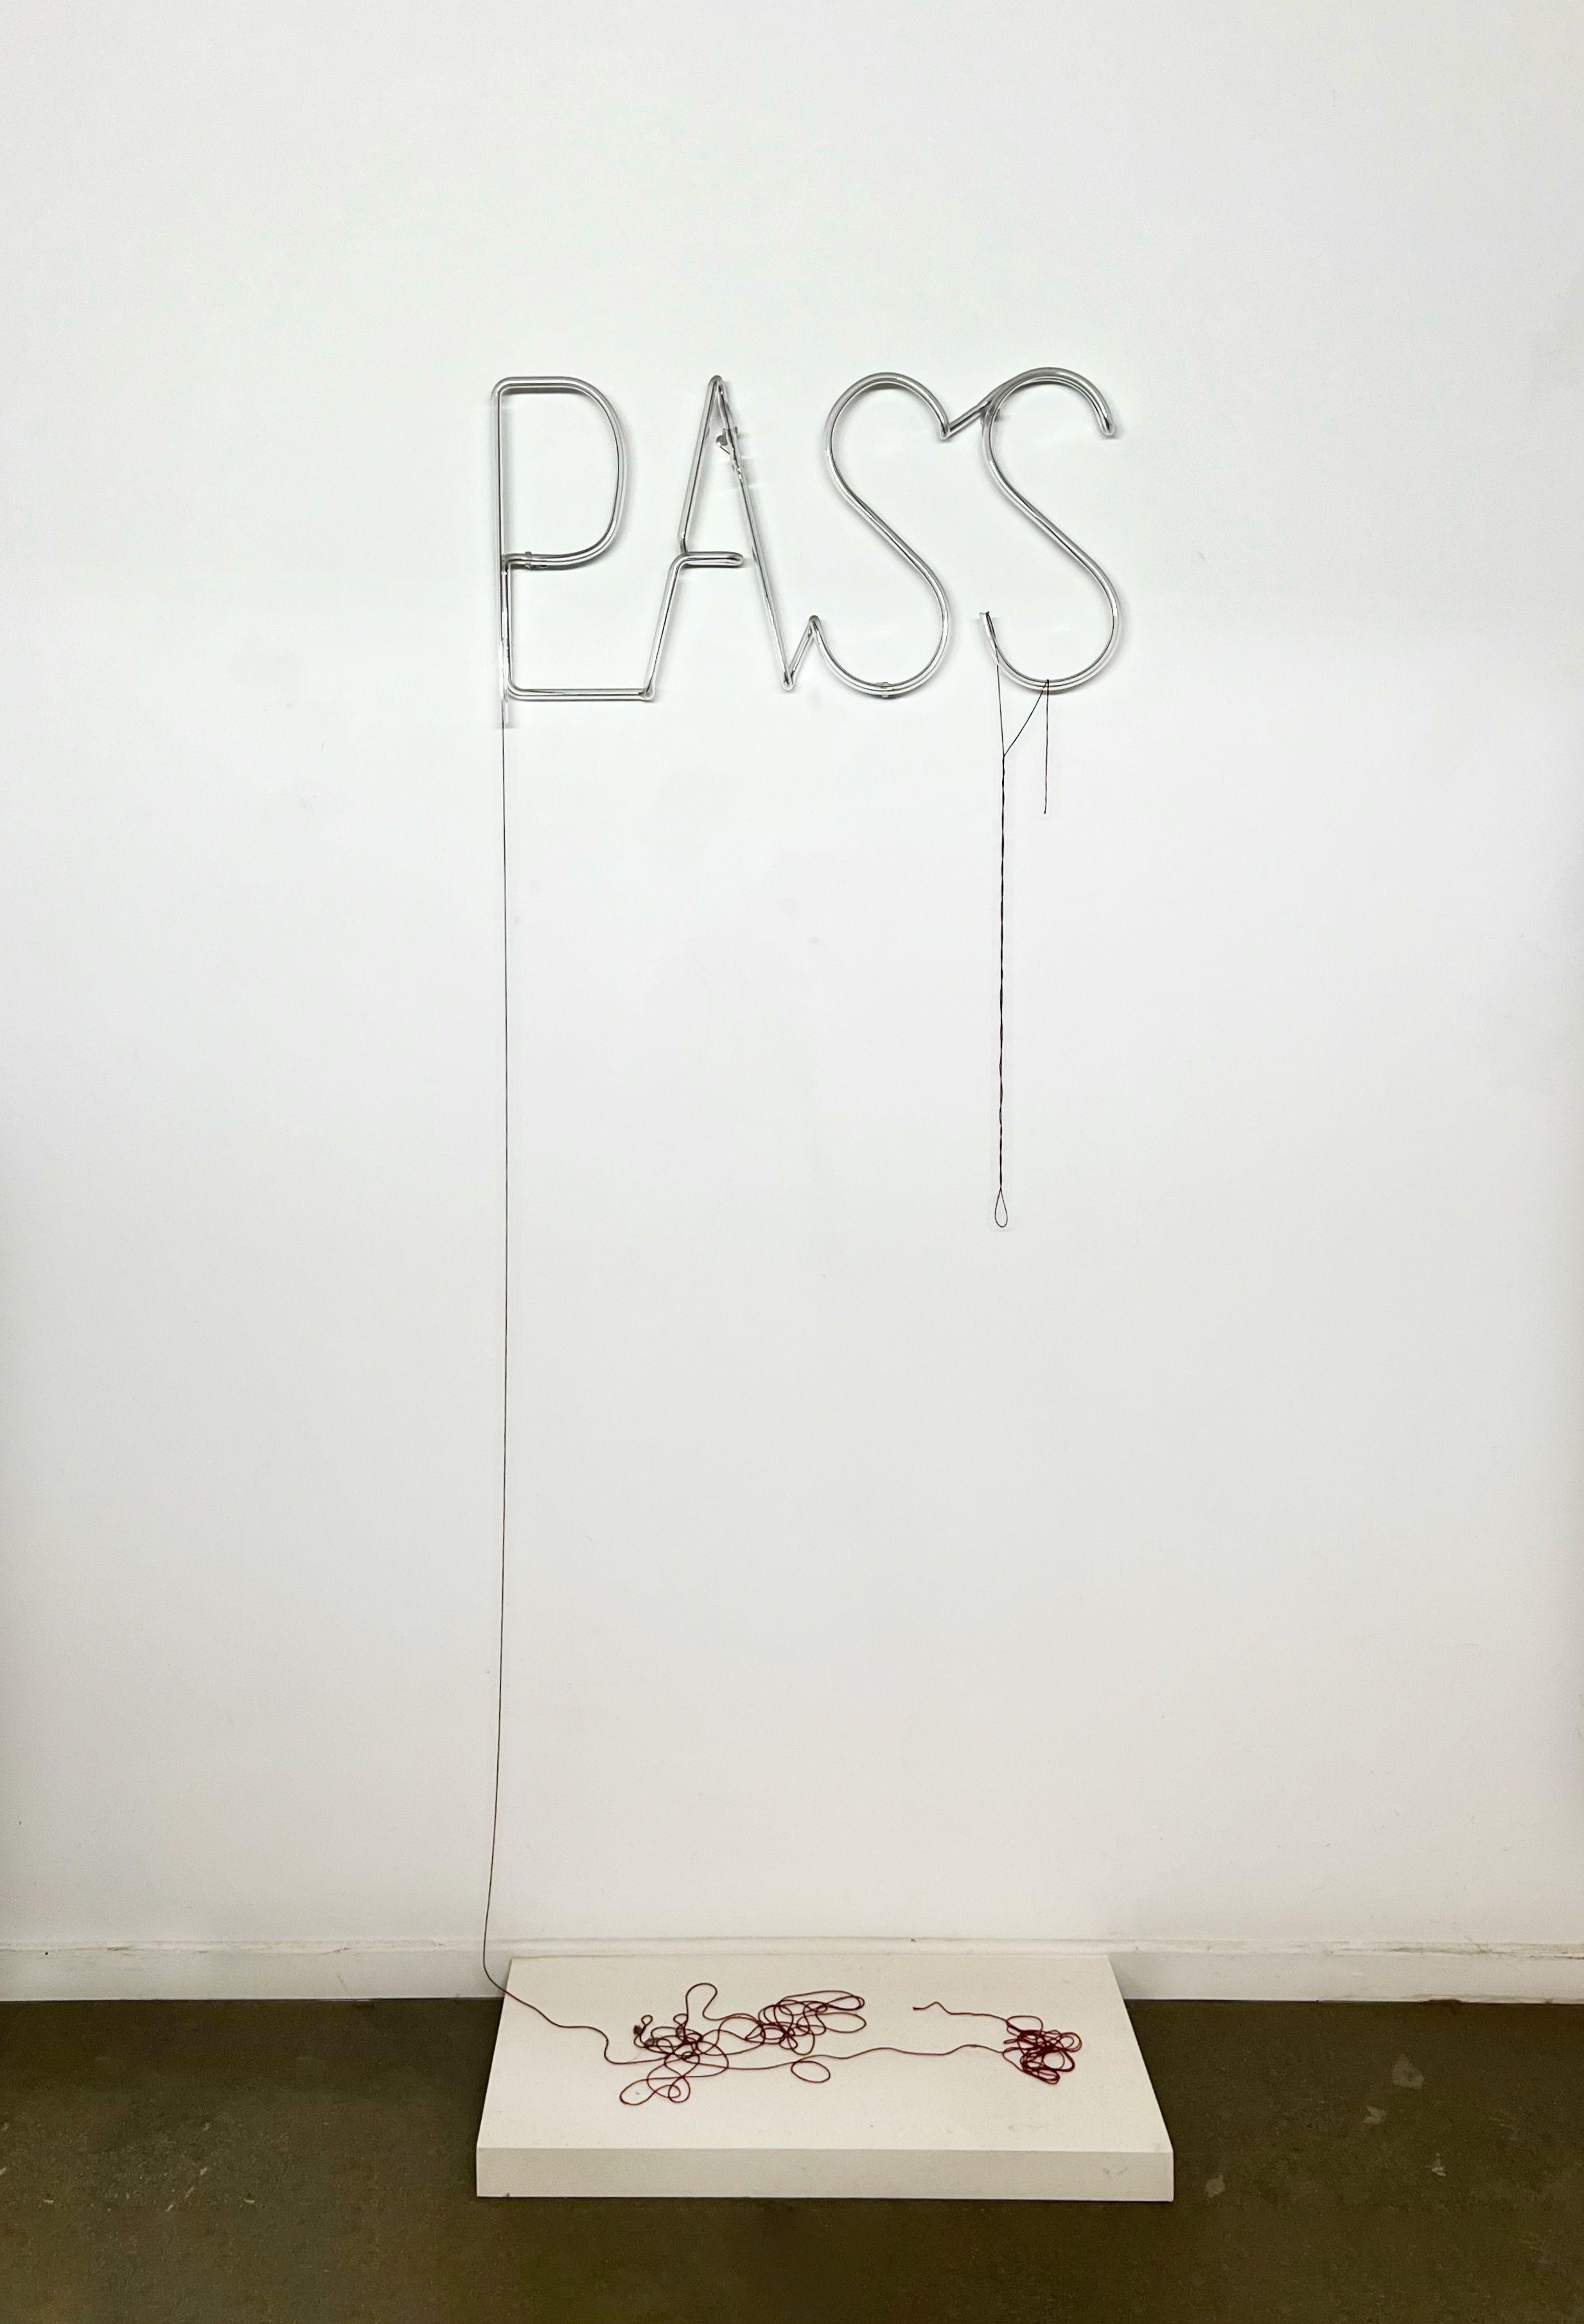 The text "pass" made out of clear glass tubing. The tubing has a red thread threaded through it. It falls to the floor and sits on a small plinth.